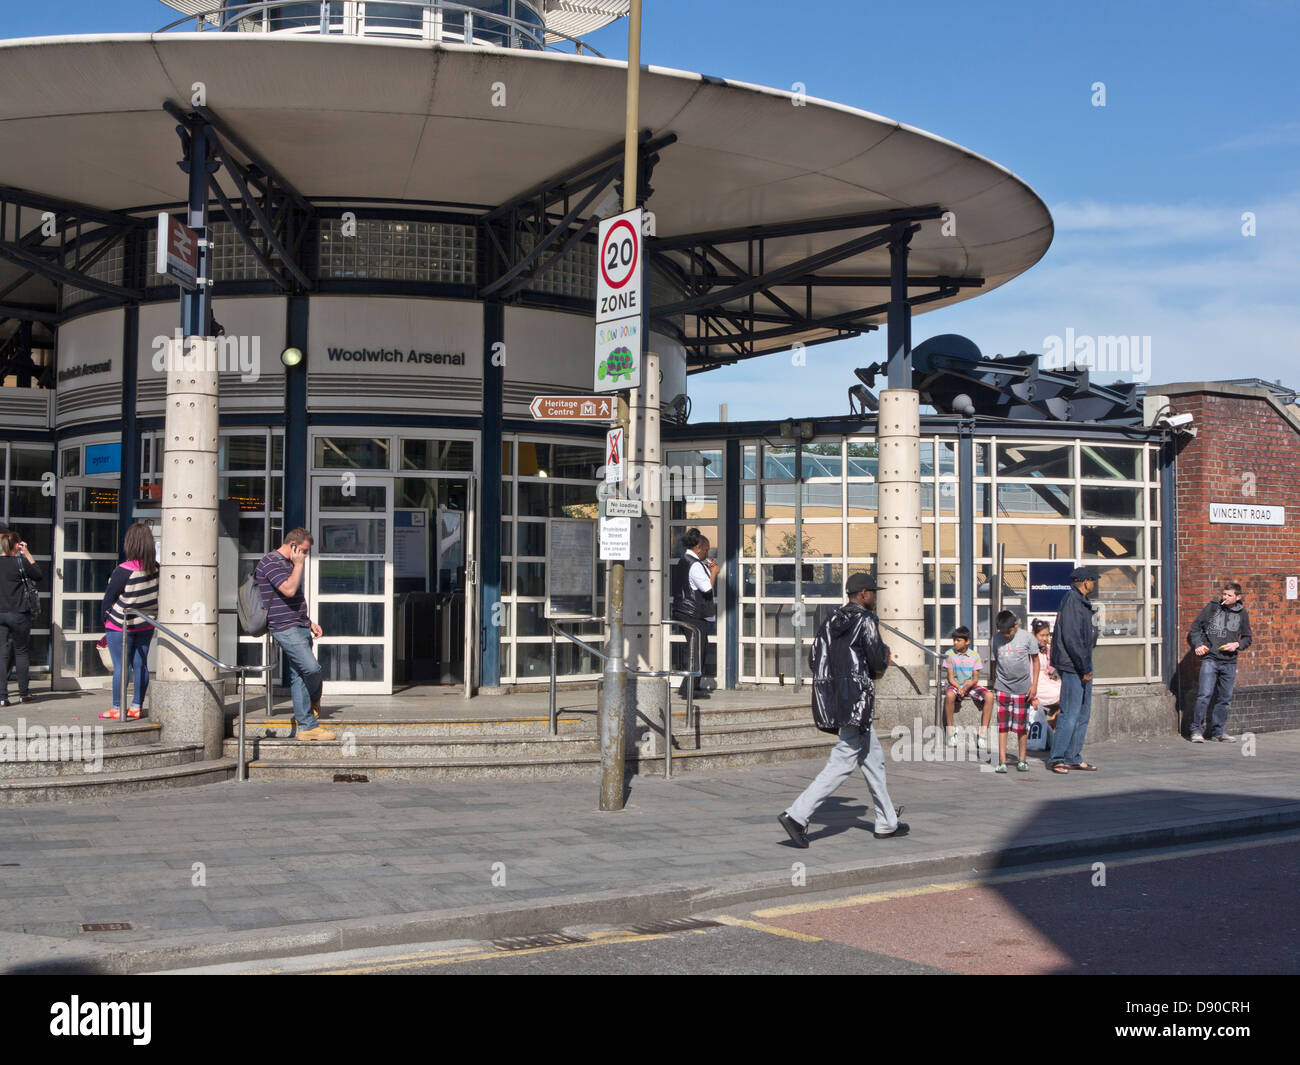 Local people in the High Street by Woolwich Arsenal station, London Stock Photo